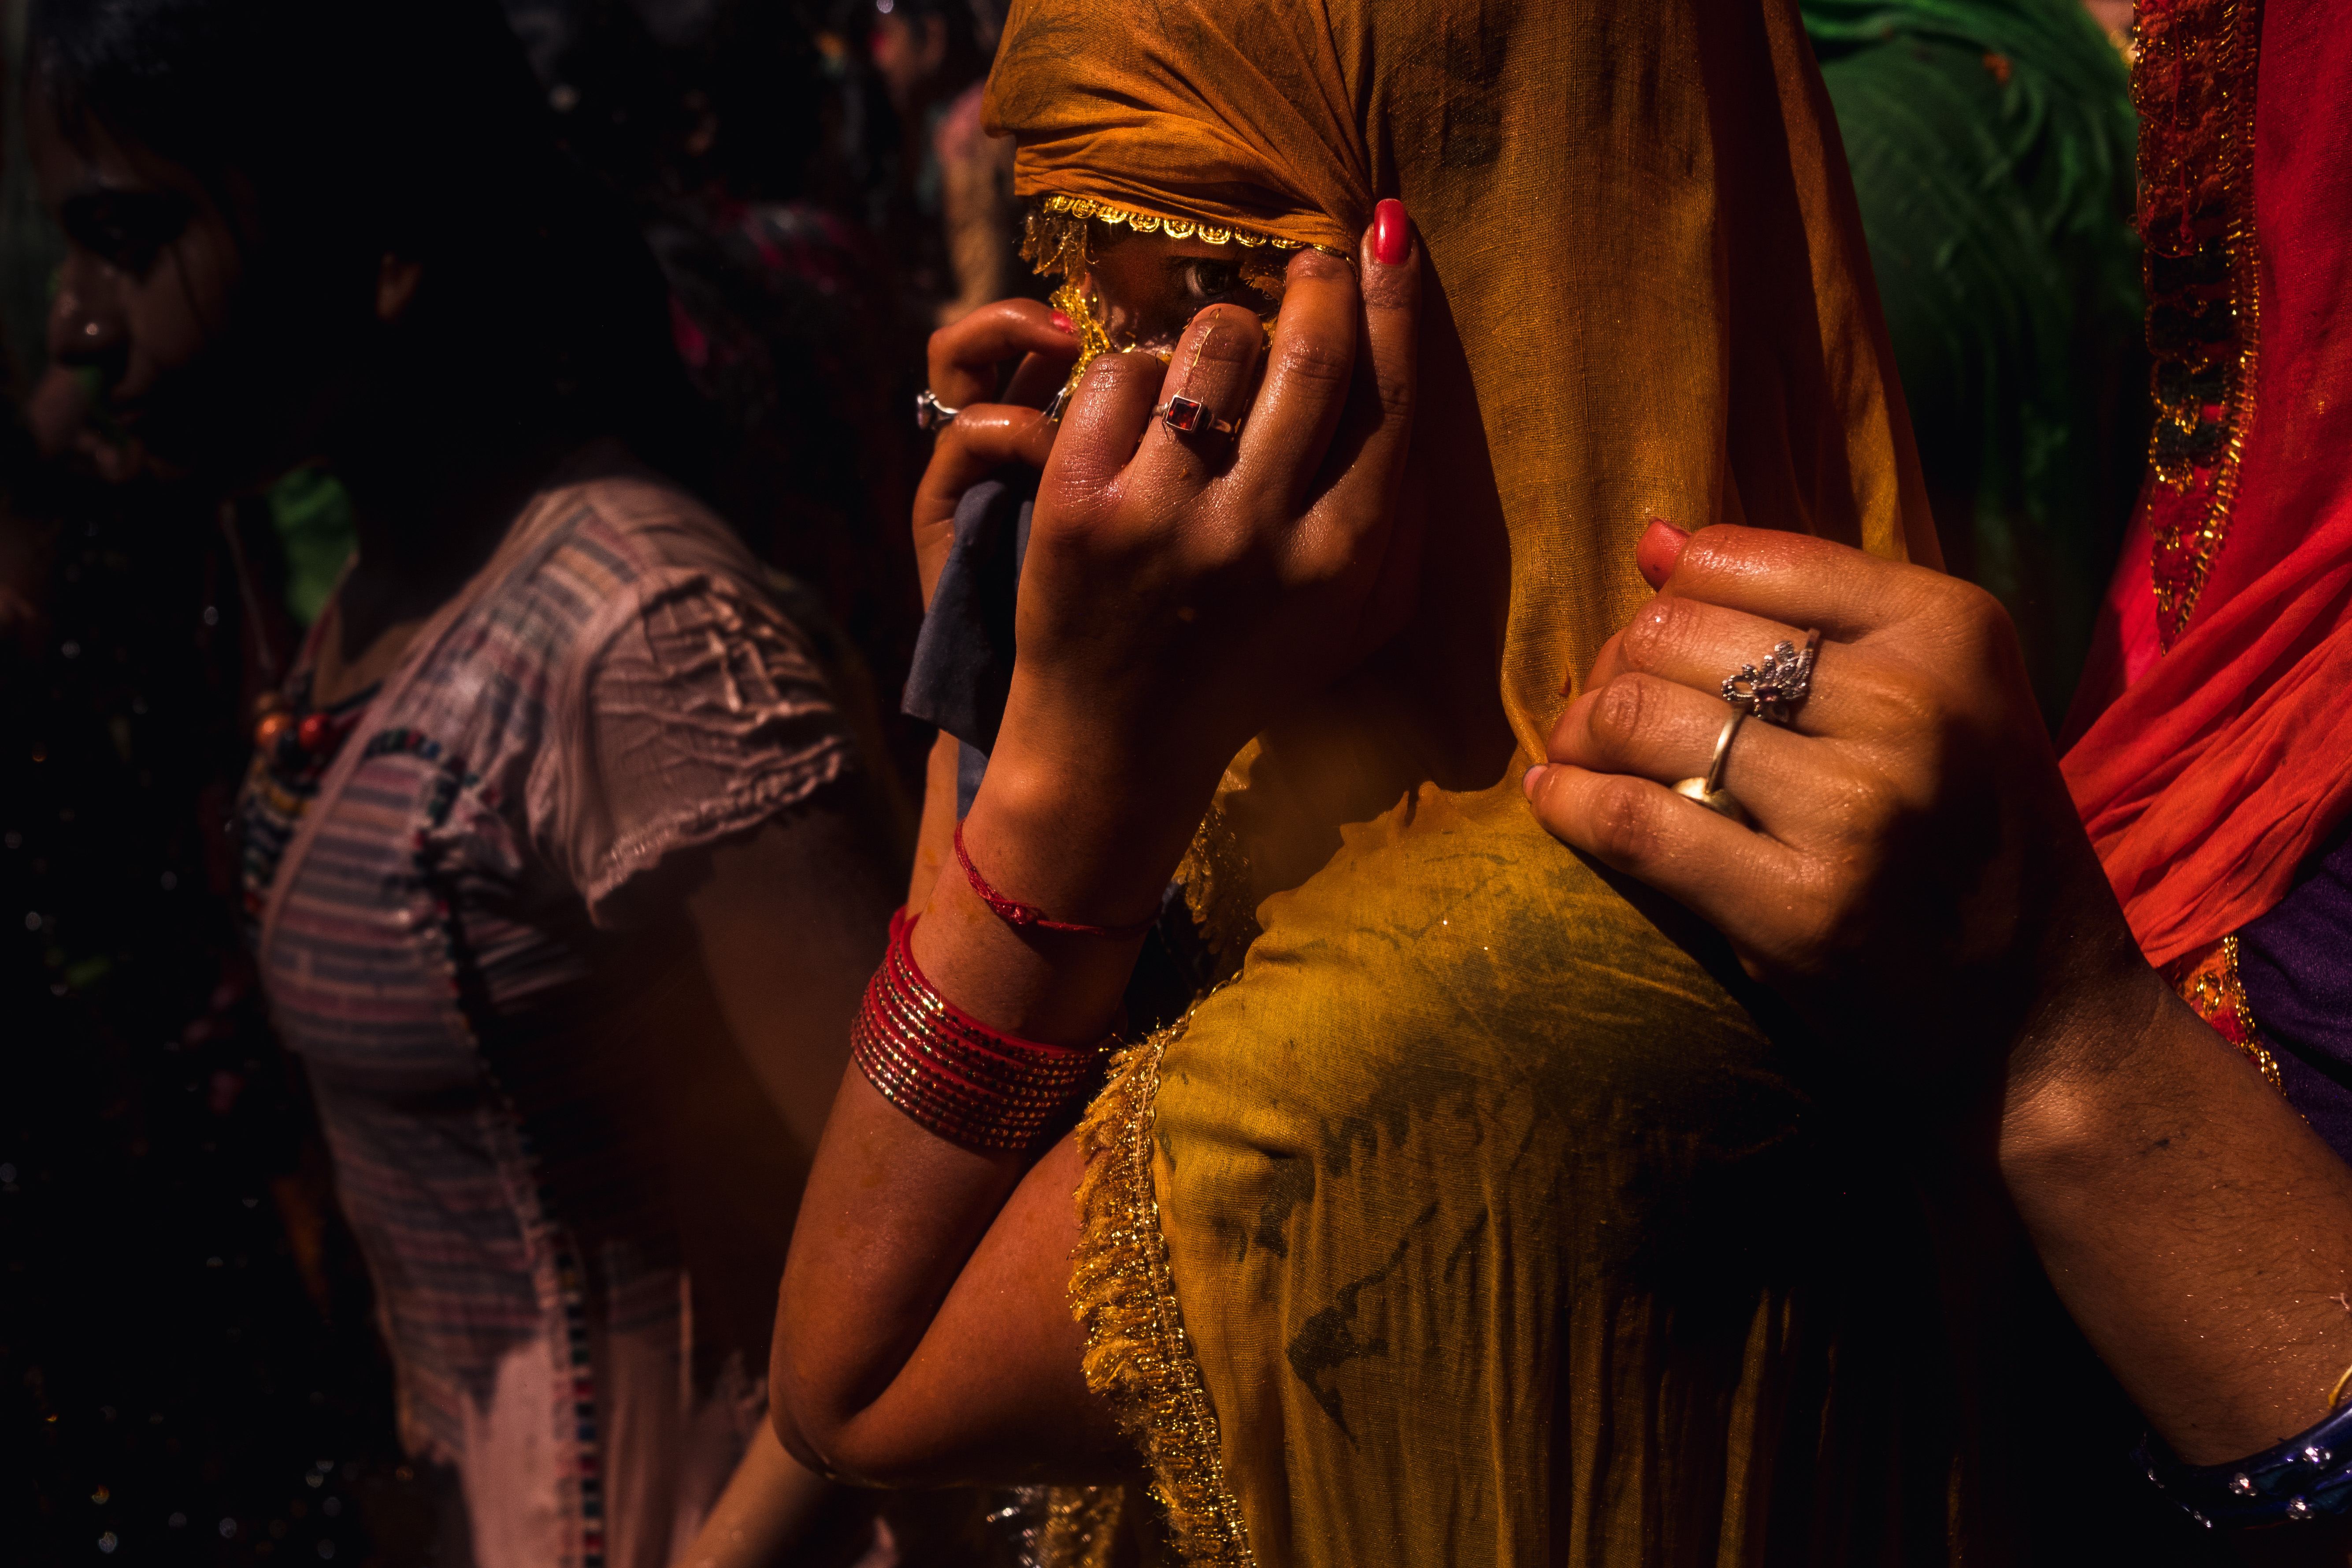 India Street Photography During Holi Festival. woman shields her face as she is comforted by lone hand. Images by Jason Vinson